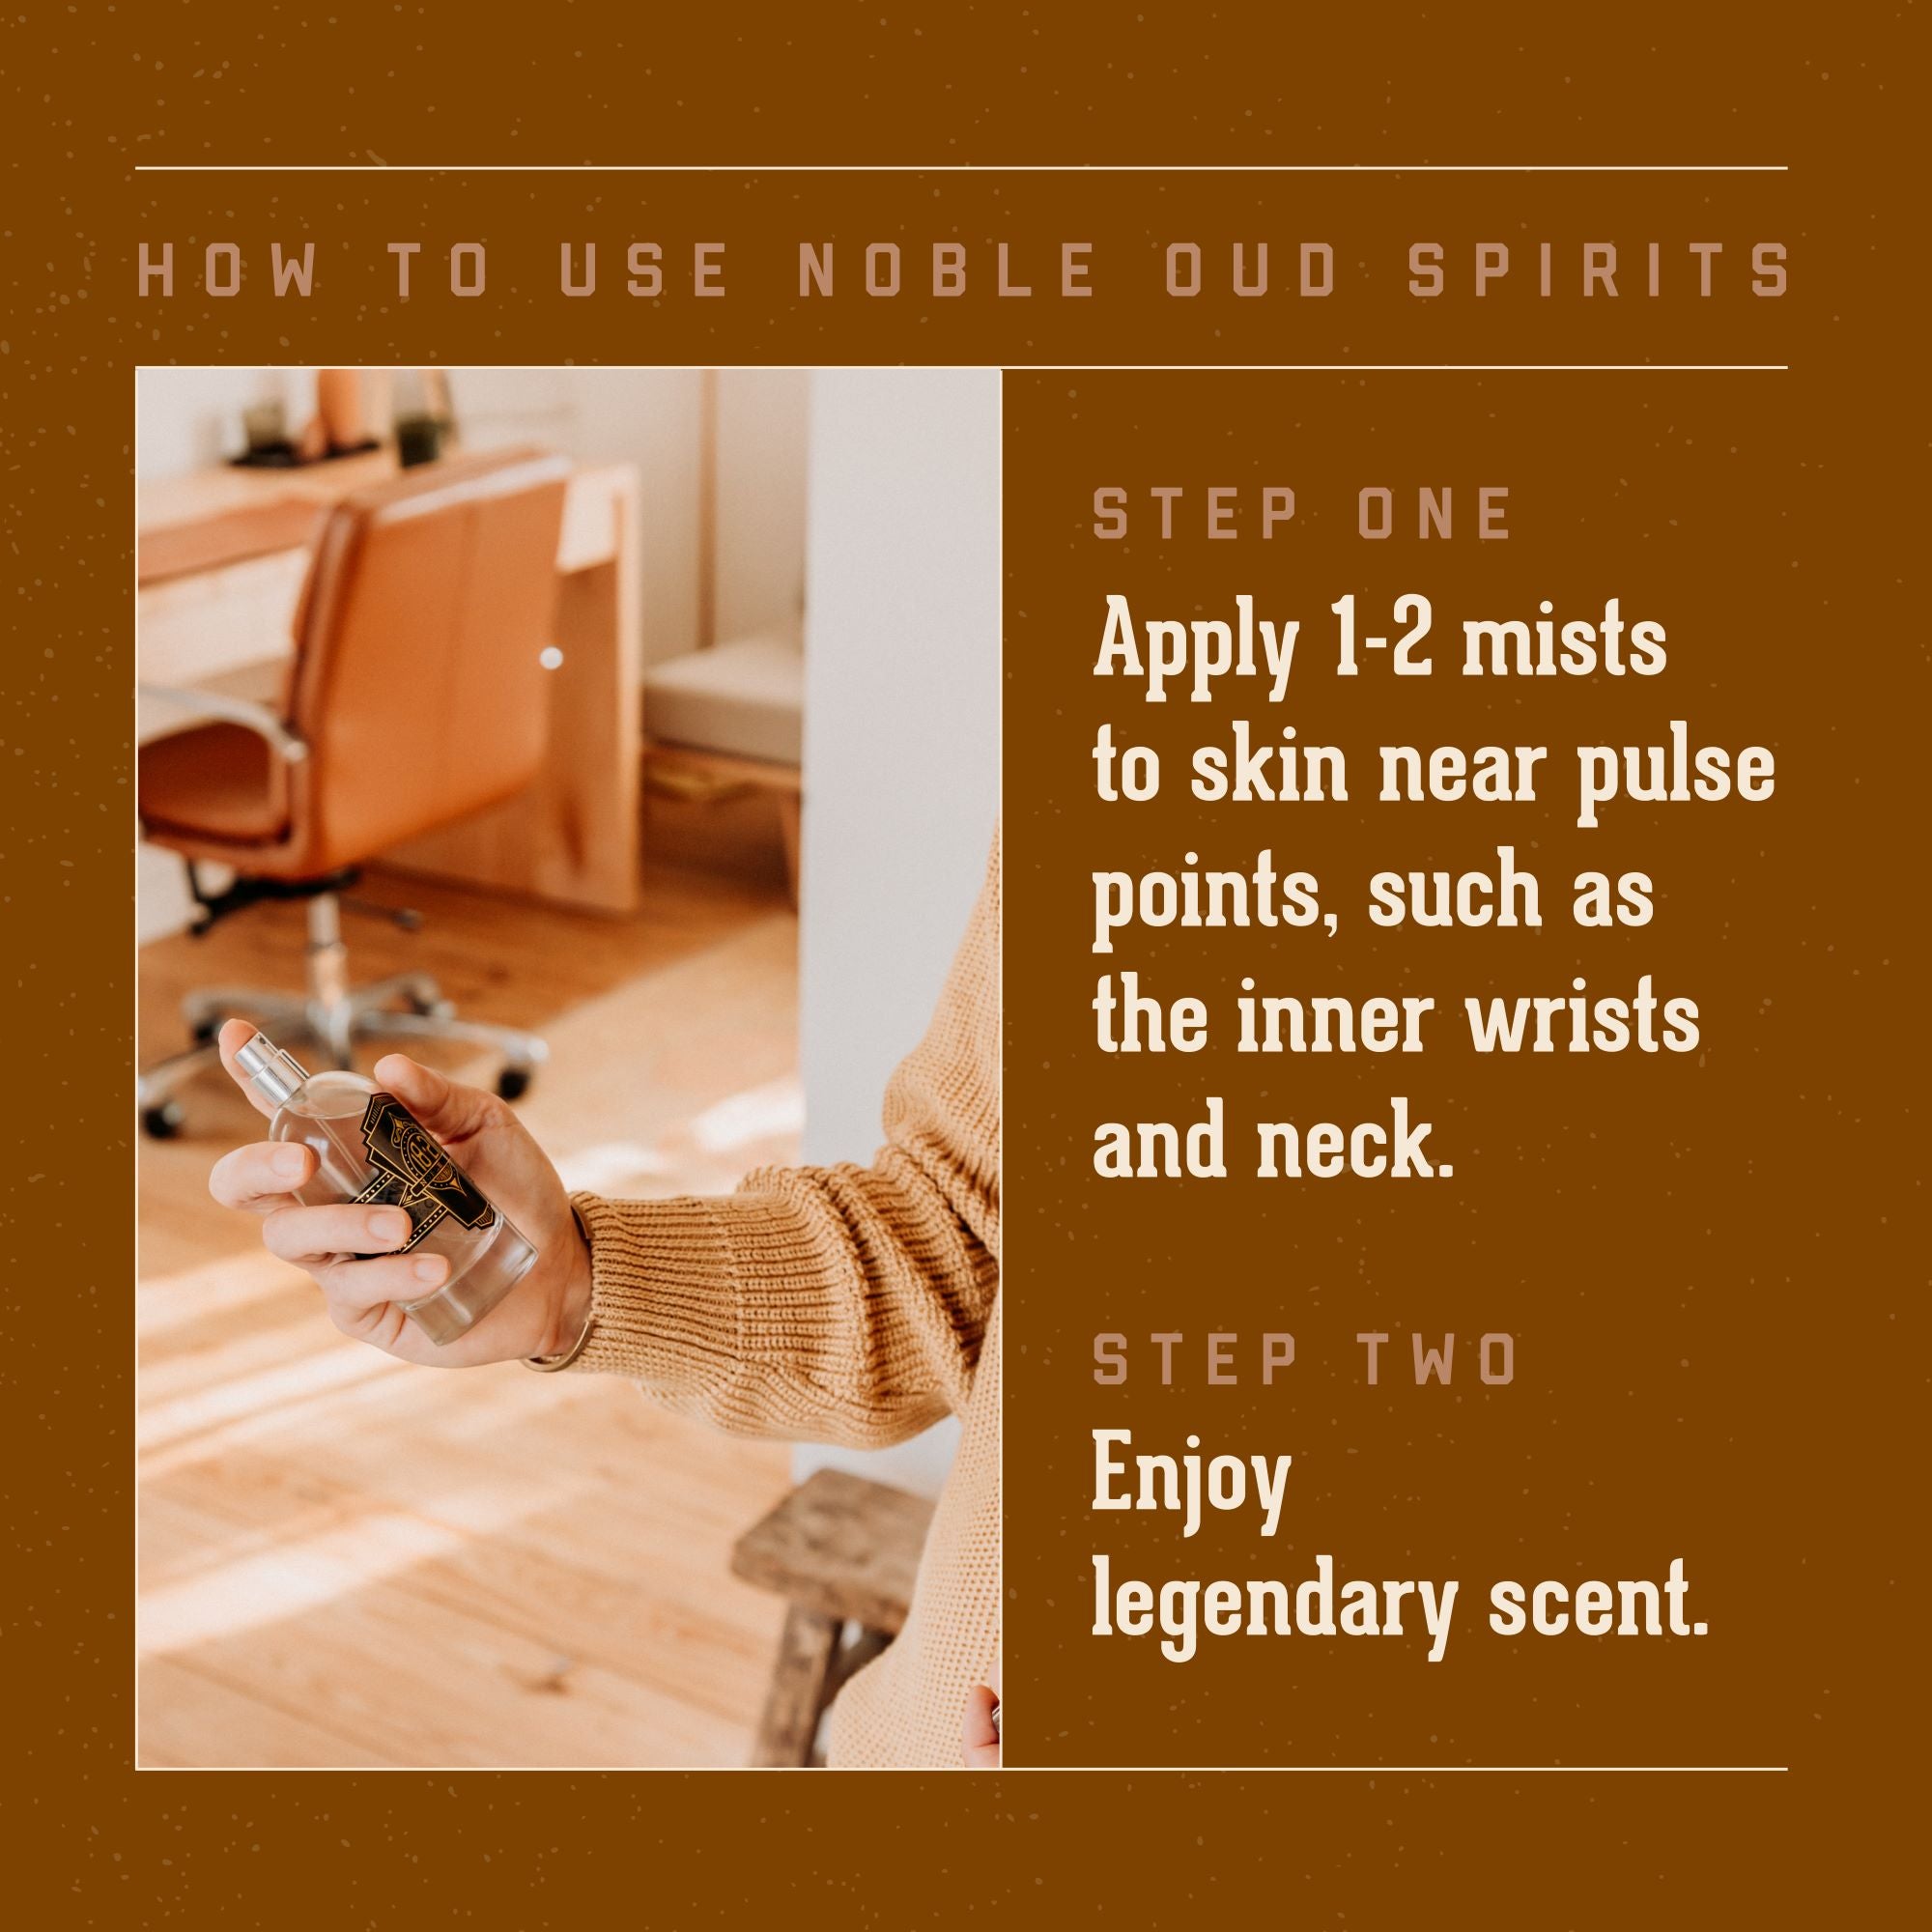 18.21 Man Made Noble Oud Spirits cologne instructions on how to use. Step one: apply 1-2 mists to skin near pulse points (such as inner wrists, and neck). Step Two: Enjoy legendary scent.